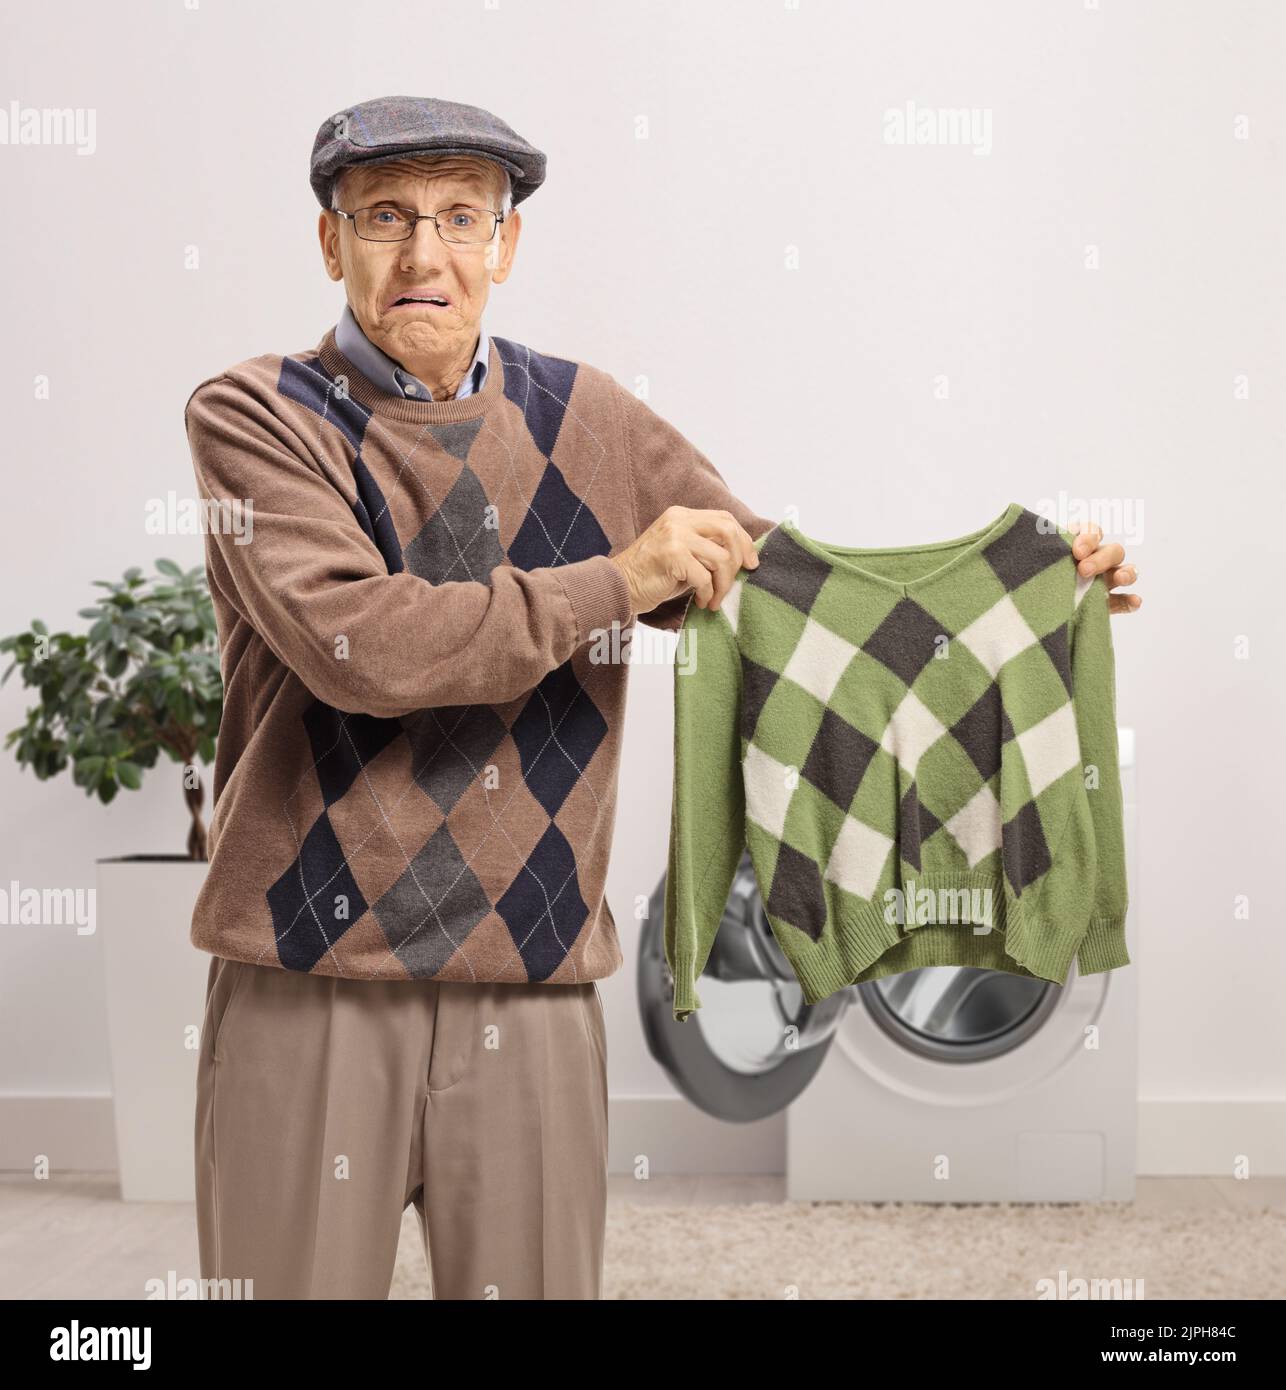 Disappointed senior man holding a shrunken blouse inside a bathroom Stock Photo